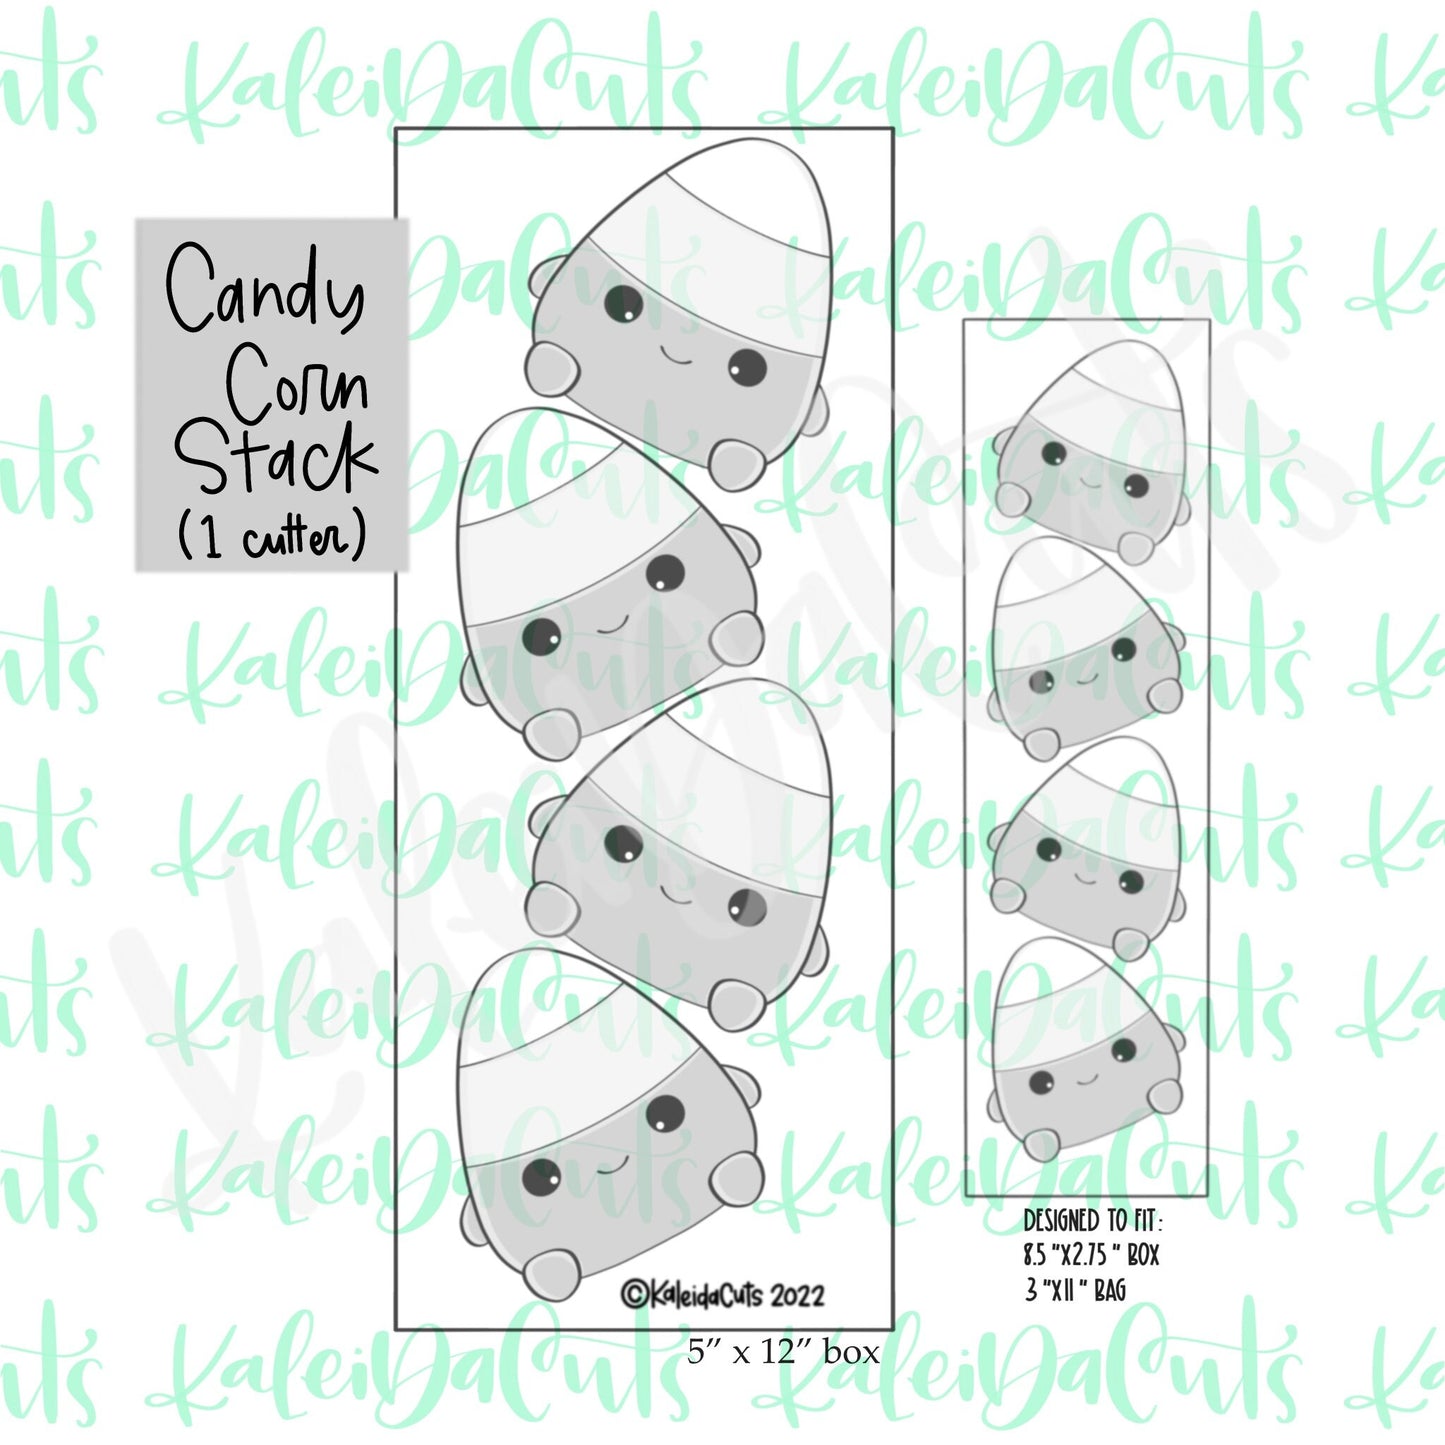 Candy Corn Stack Cookie Cutter